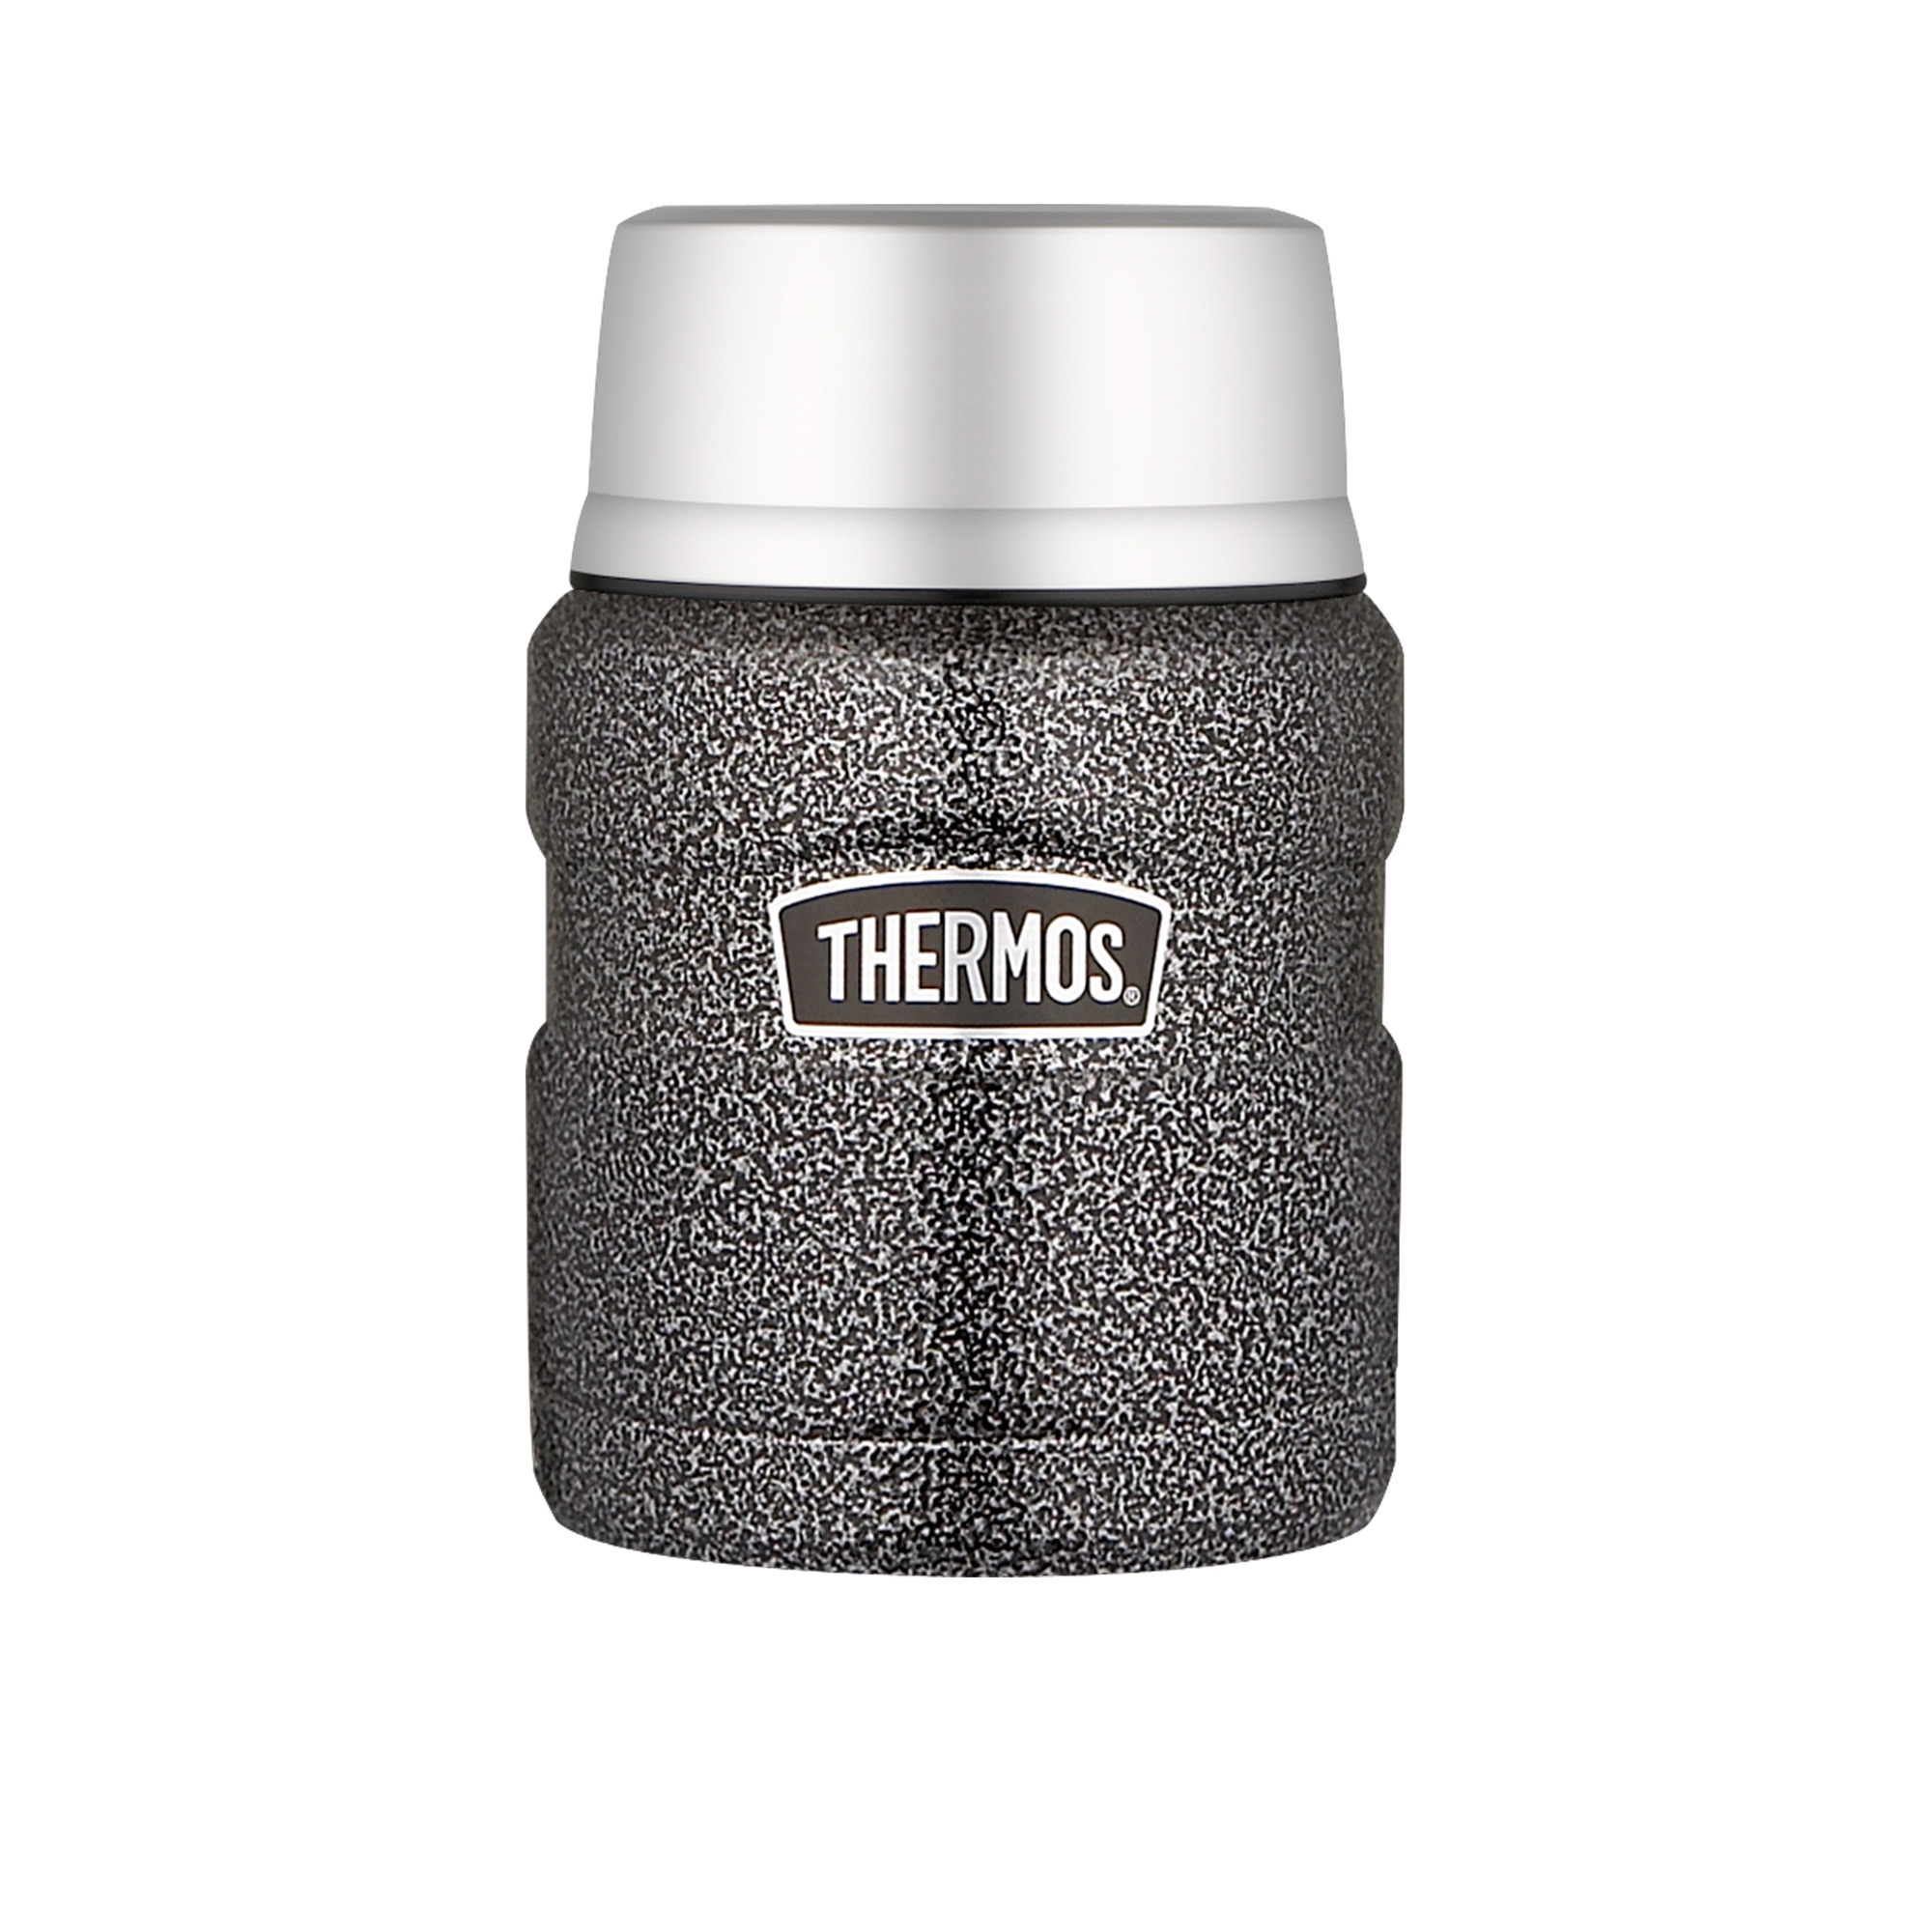 Thermos Stainless King Insulated Food Jar 470ml Hammertone Image 1